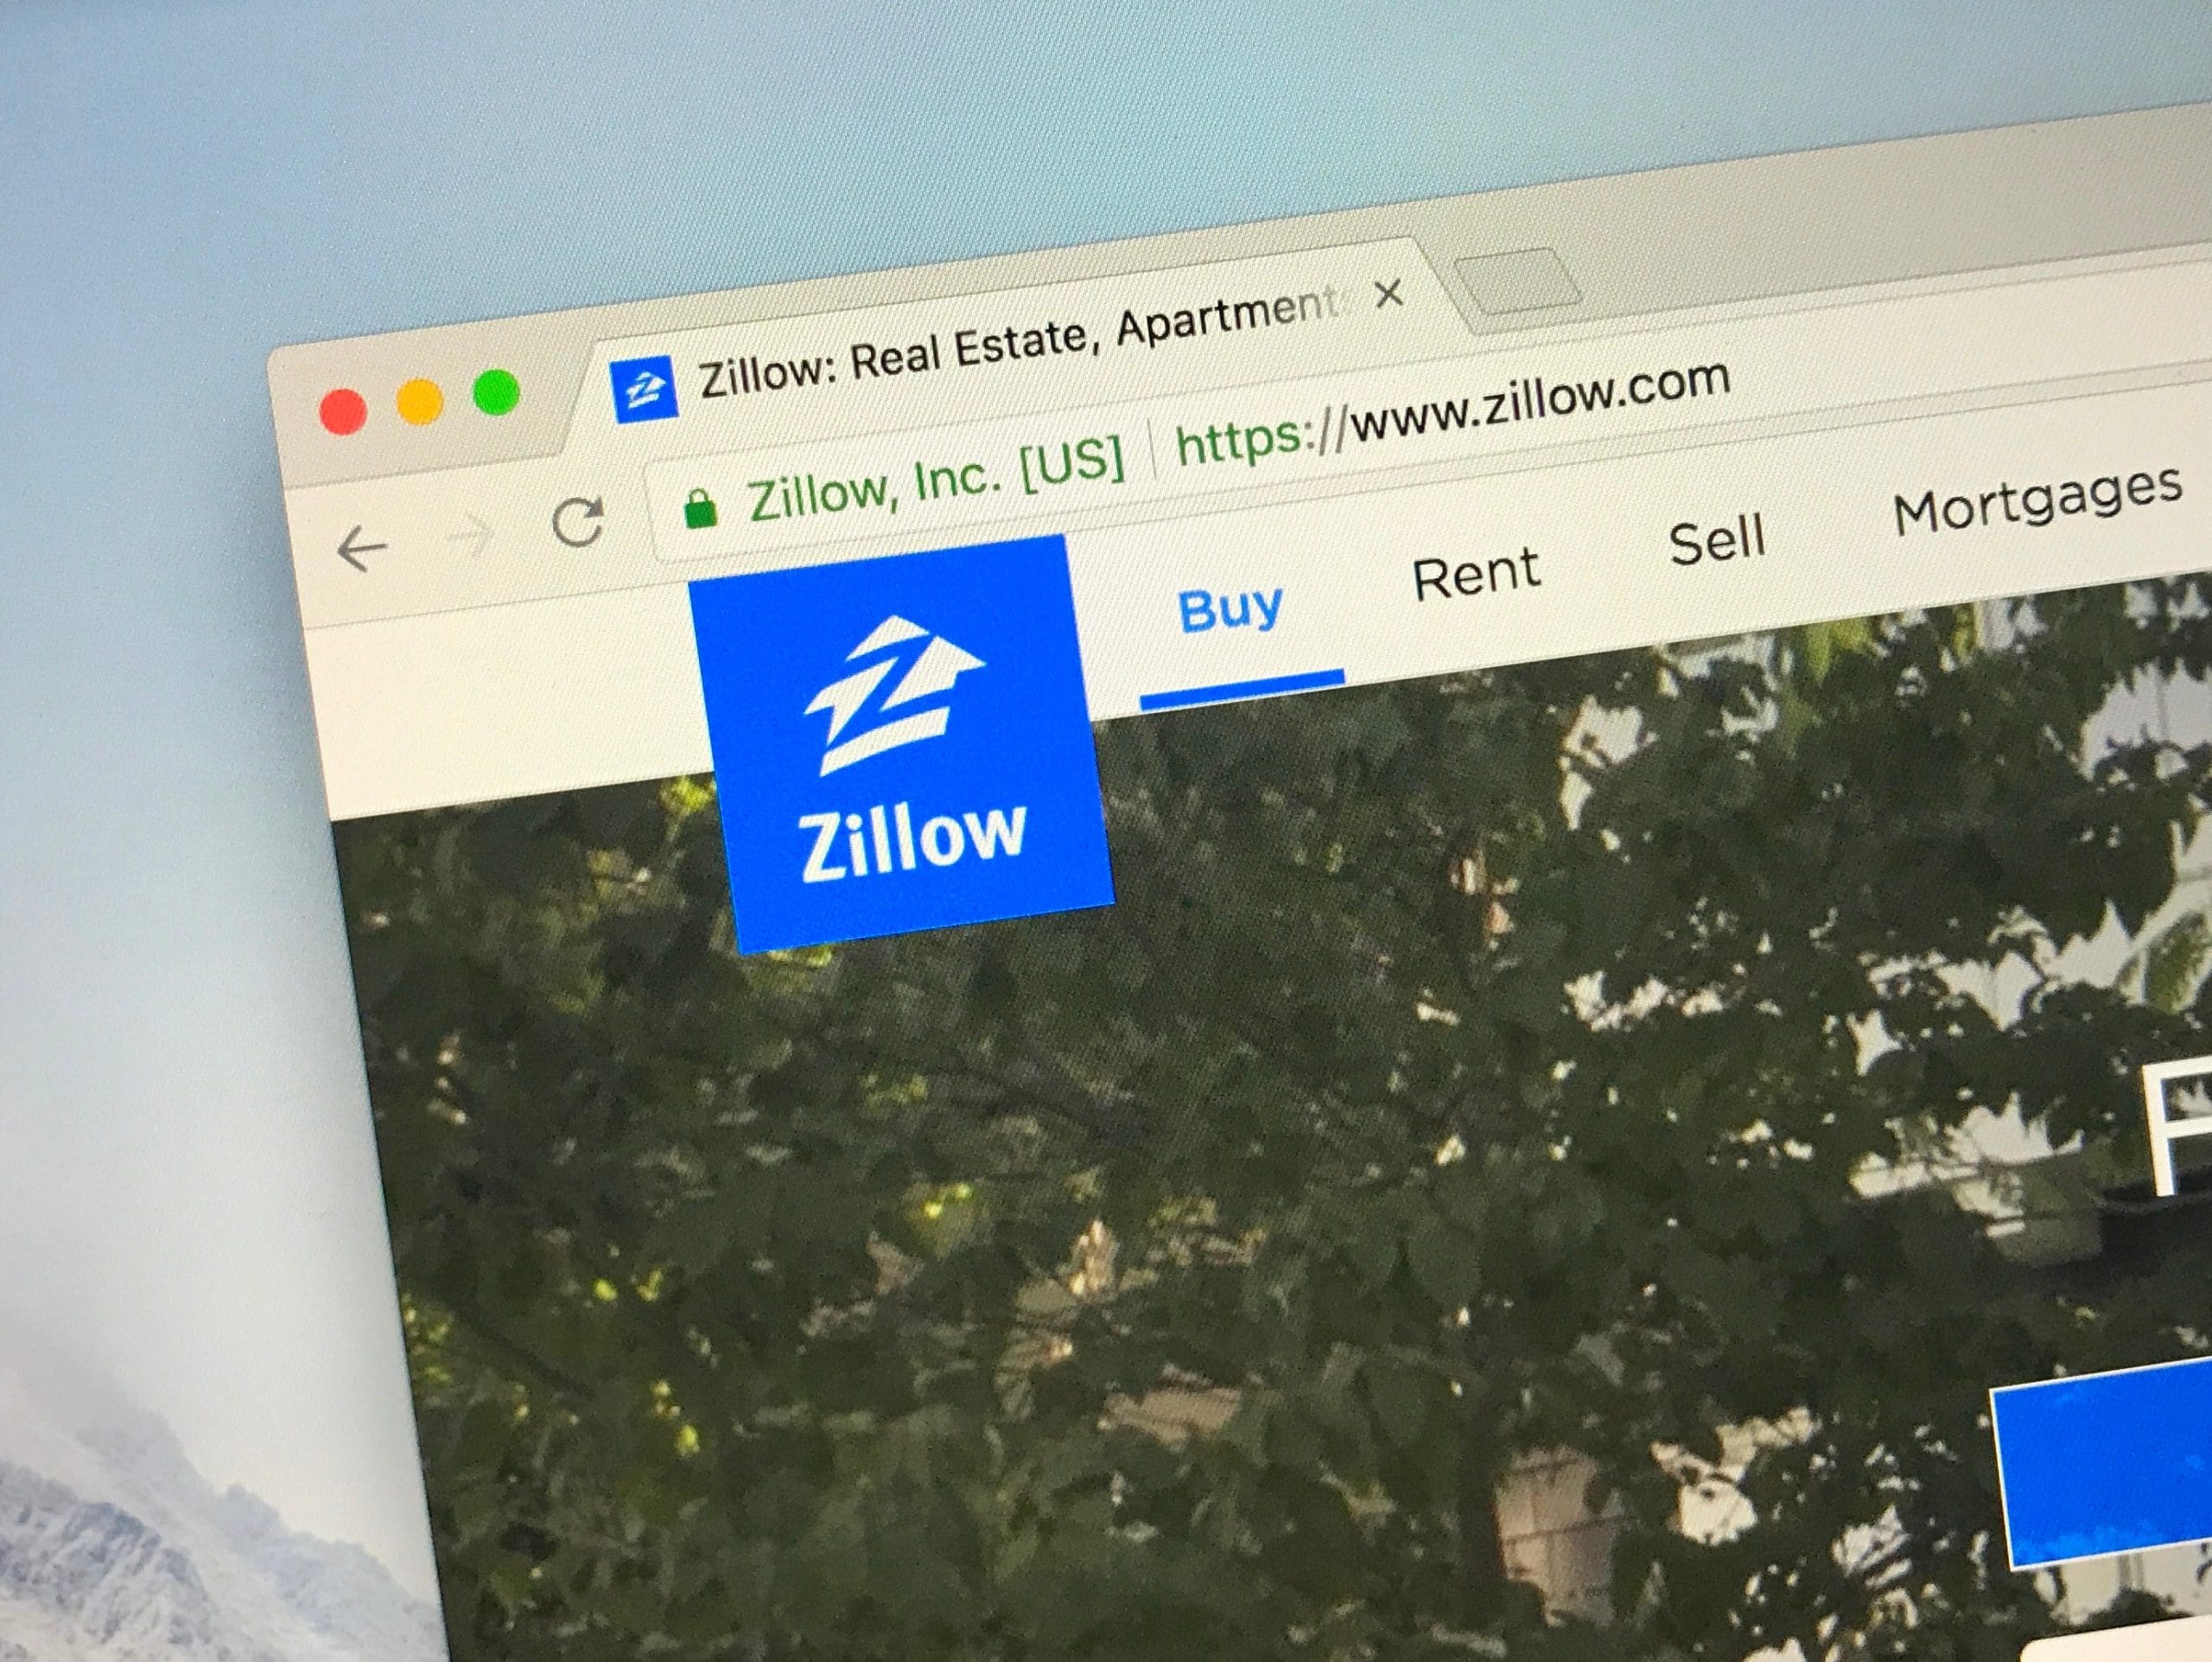 The zillow website is displayed on a computer screen.